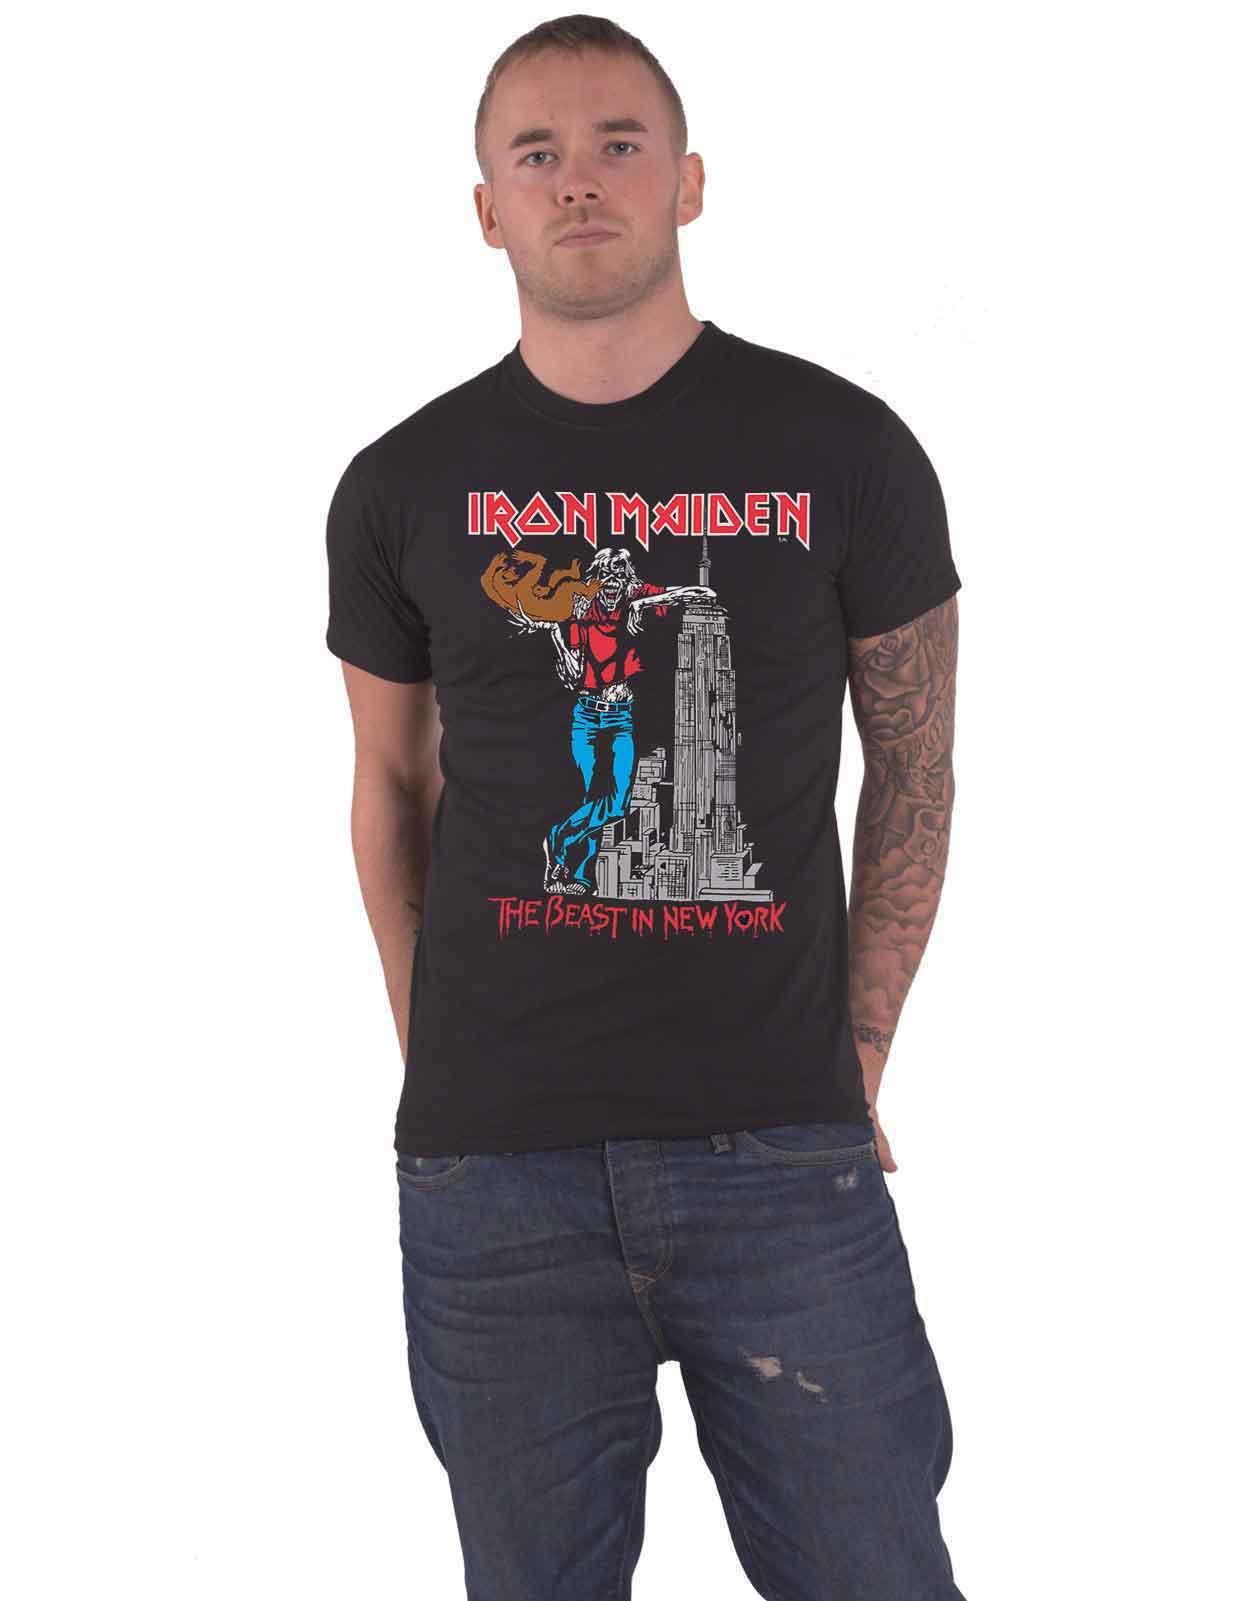 Iron Maiden T Shirt The Beast In New York 1982 Tour new Official Mens Black